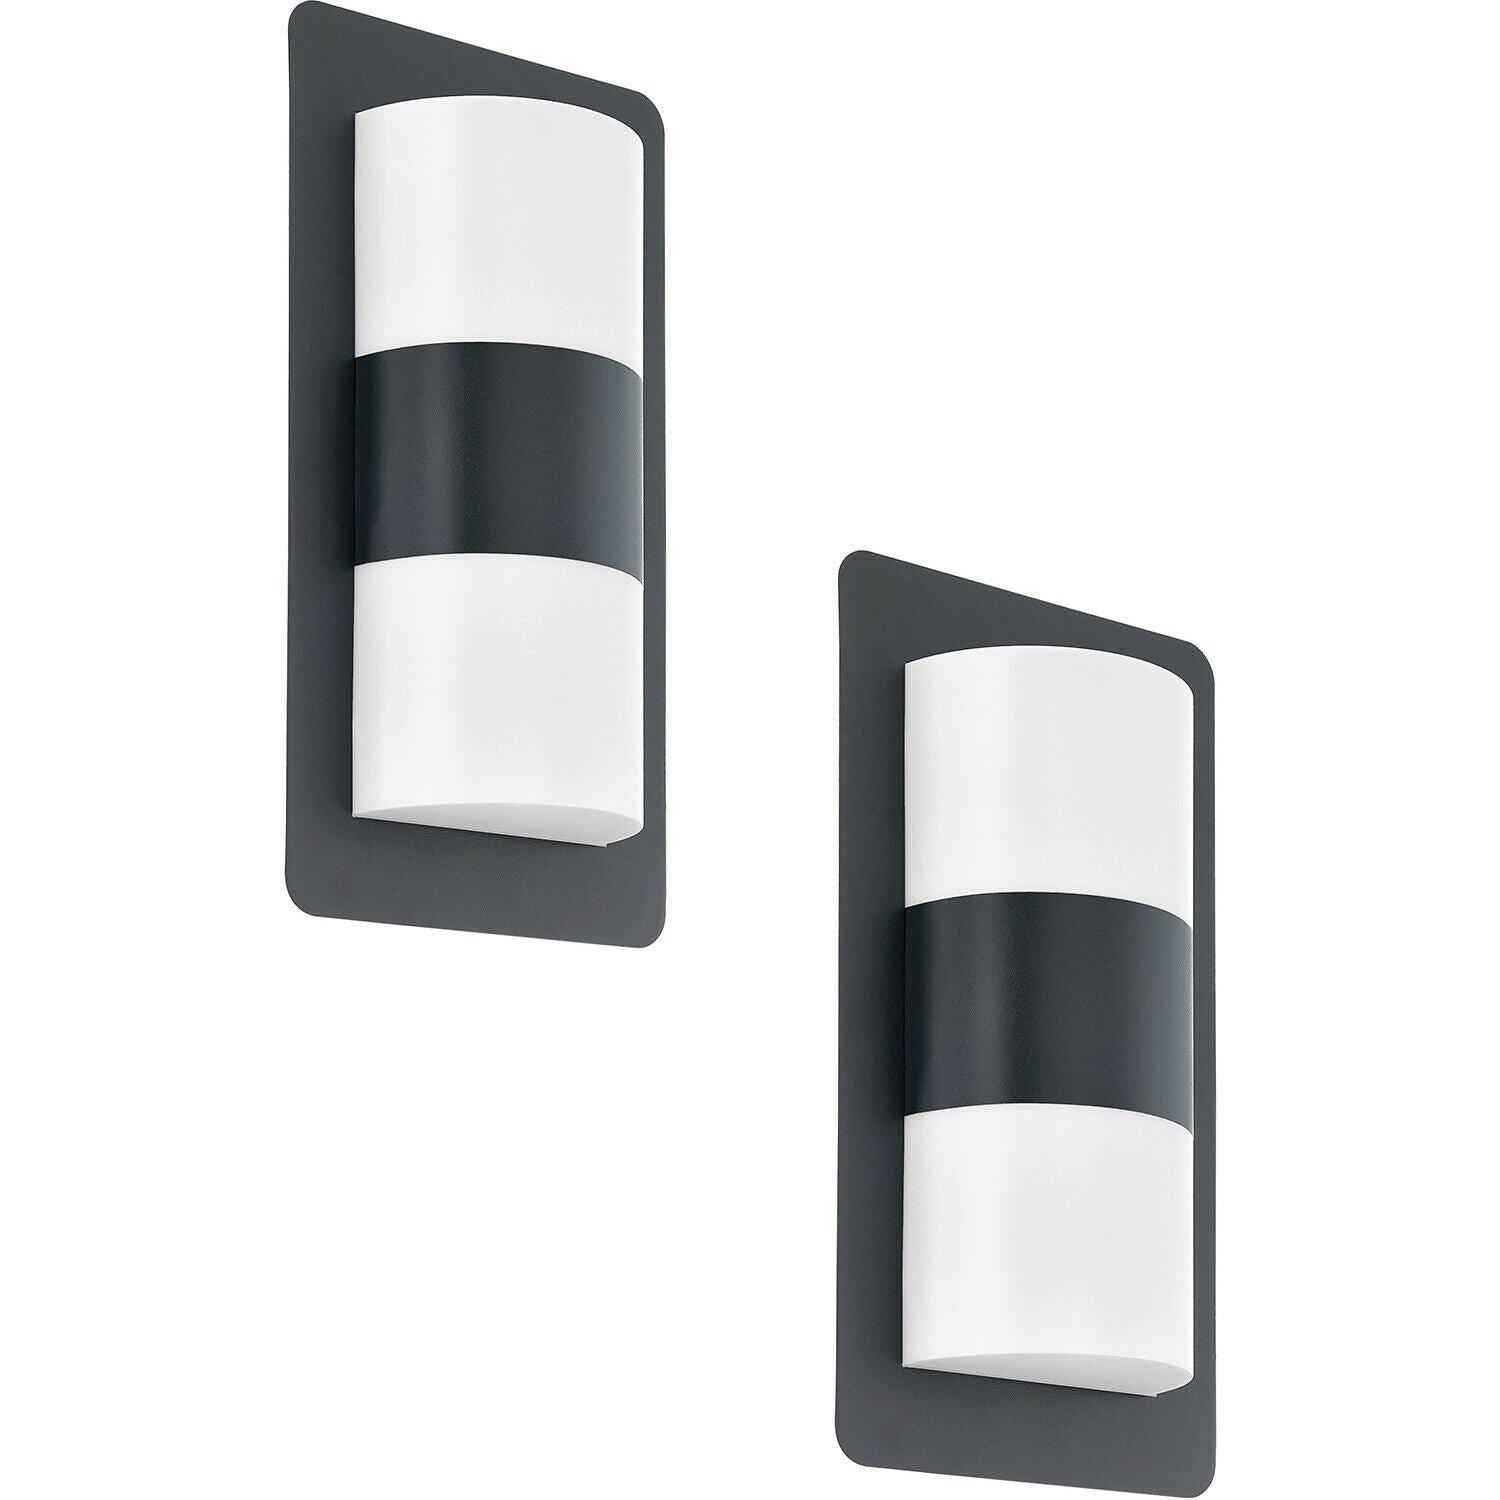 2 PACK IP44 Outdoor Wall Light Anthracite Zinc Plated Steel 2x 10W E27